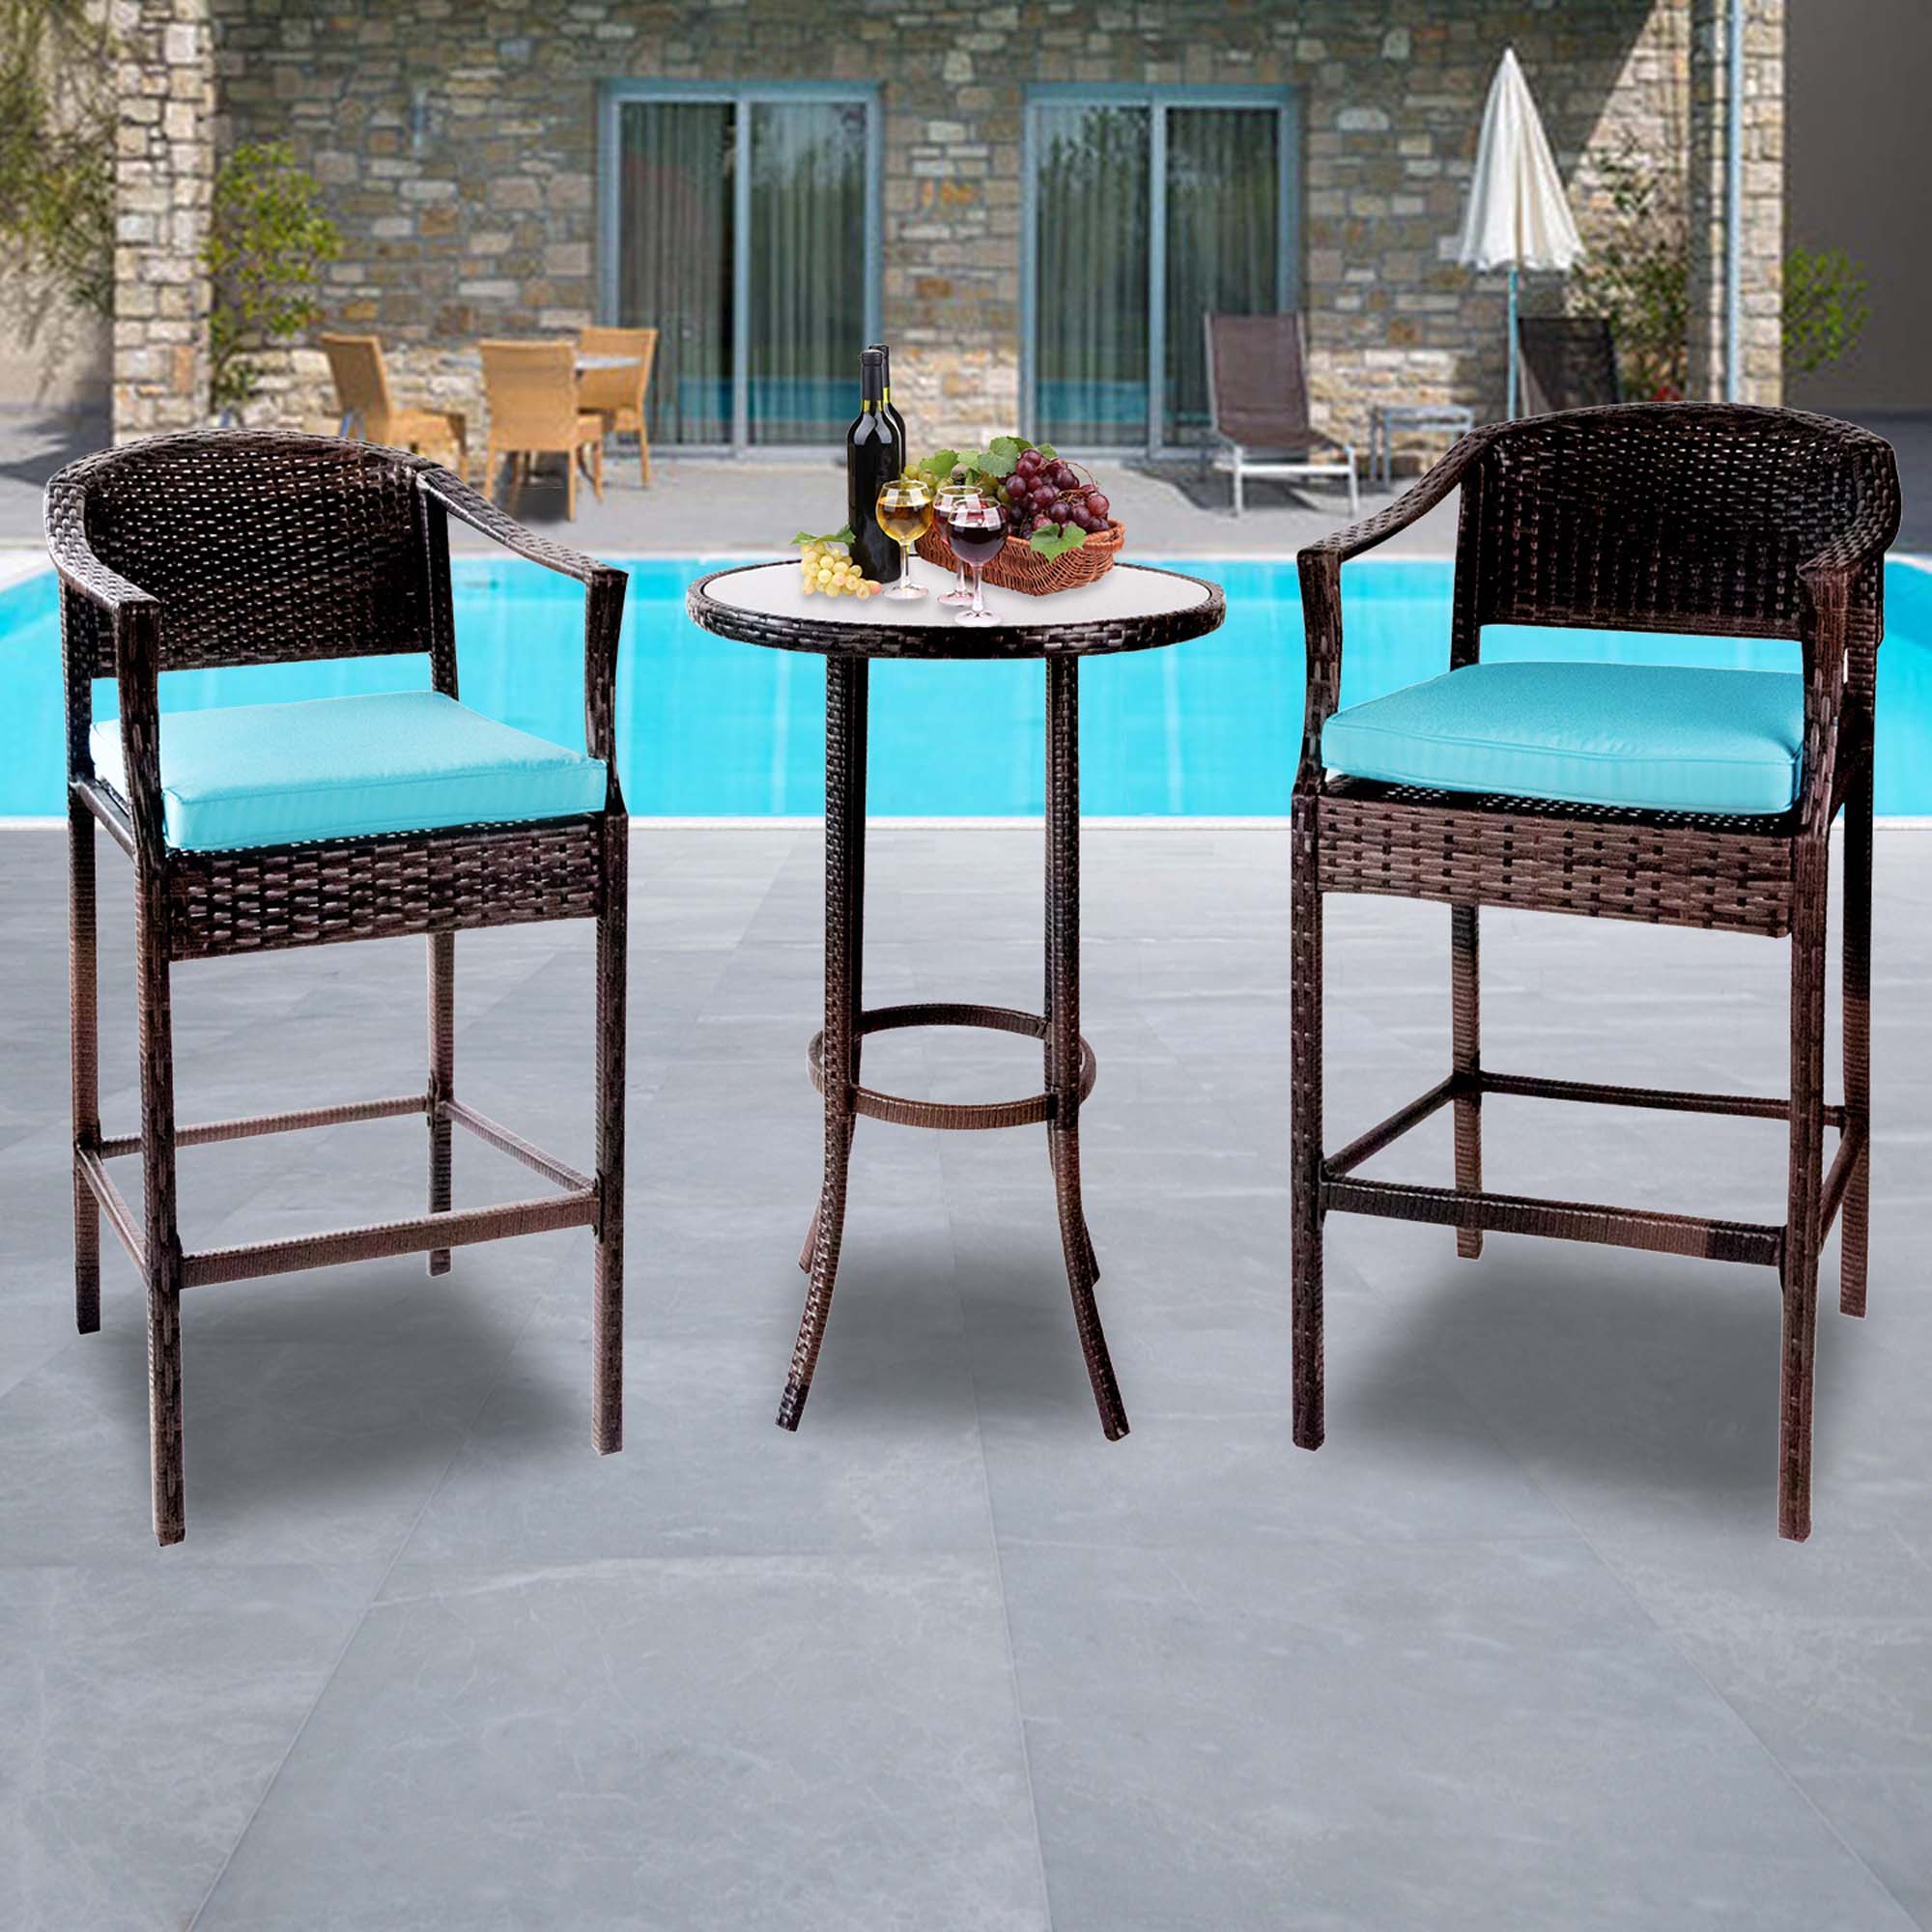 Lightweight Patio Bistro Set, 3 Piece Outdoor Bar Table & Chairs Set, 2 High Bar Chairs & 1 High Glass Top Table, All Weather Metal Frame Furniture Set, Outdoor Patio Set for Garden Yard Cafe, T156 - image 2 of 8